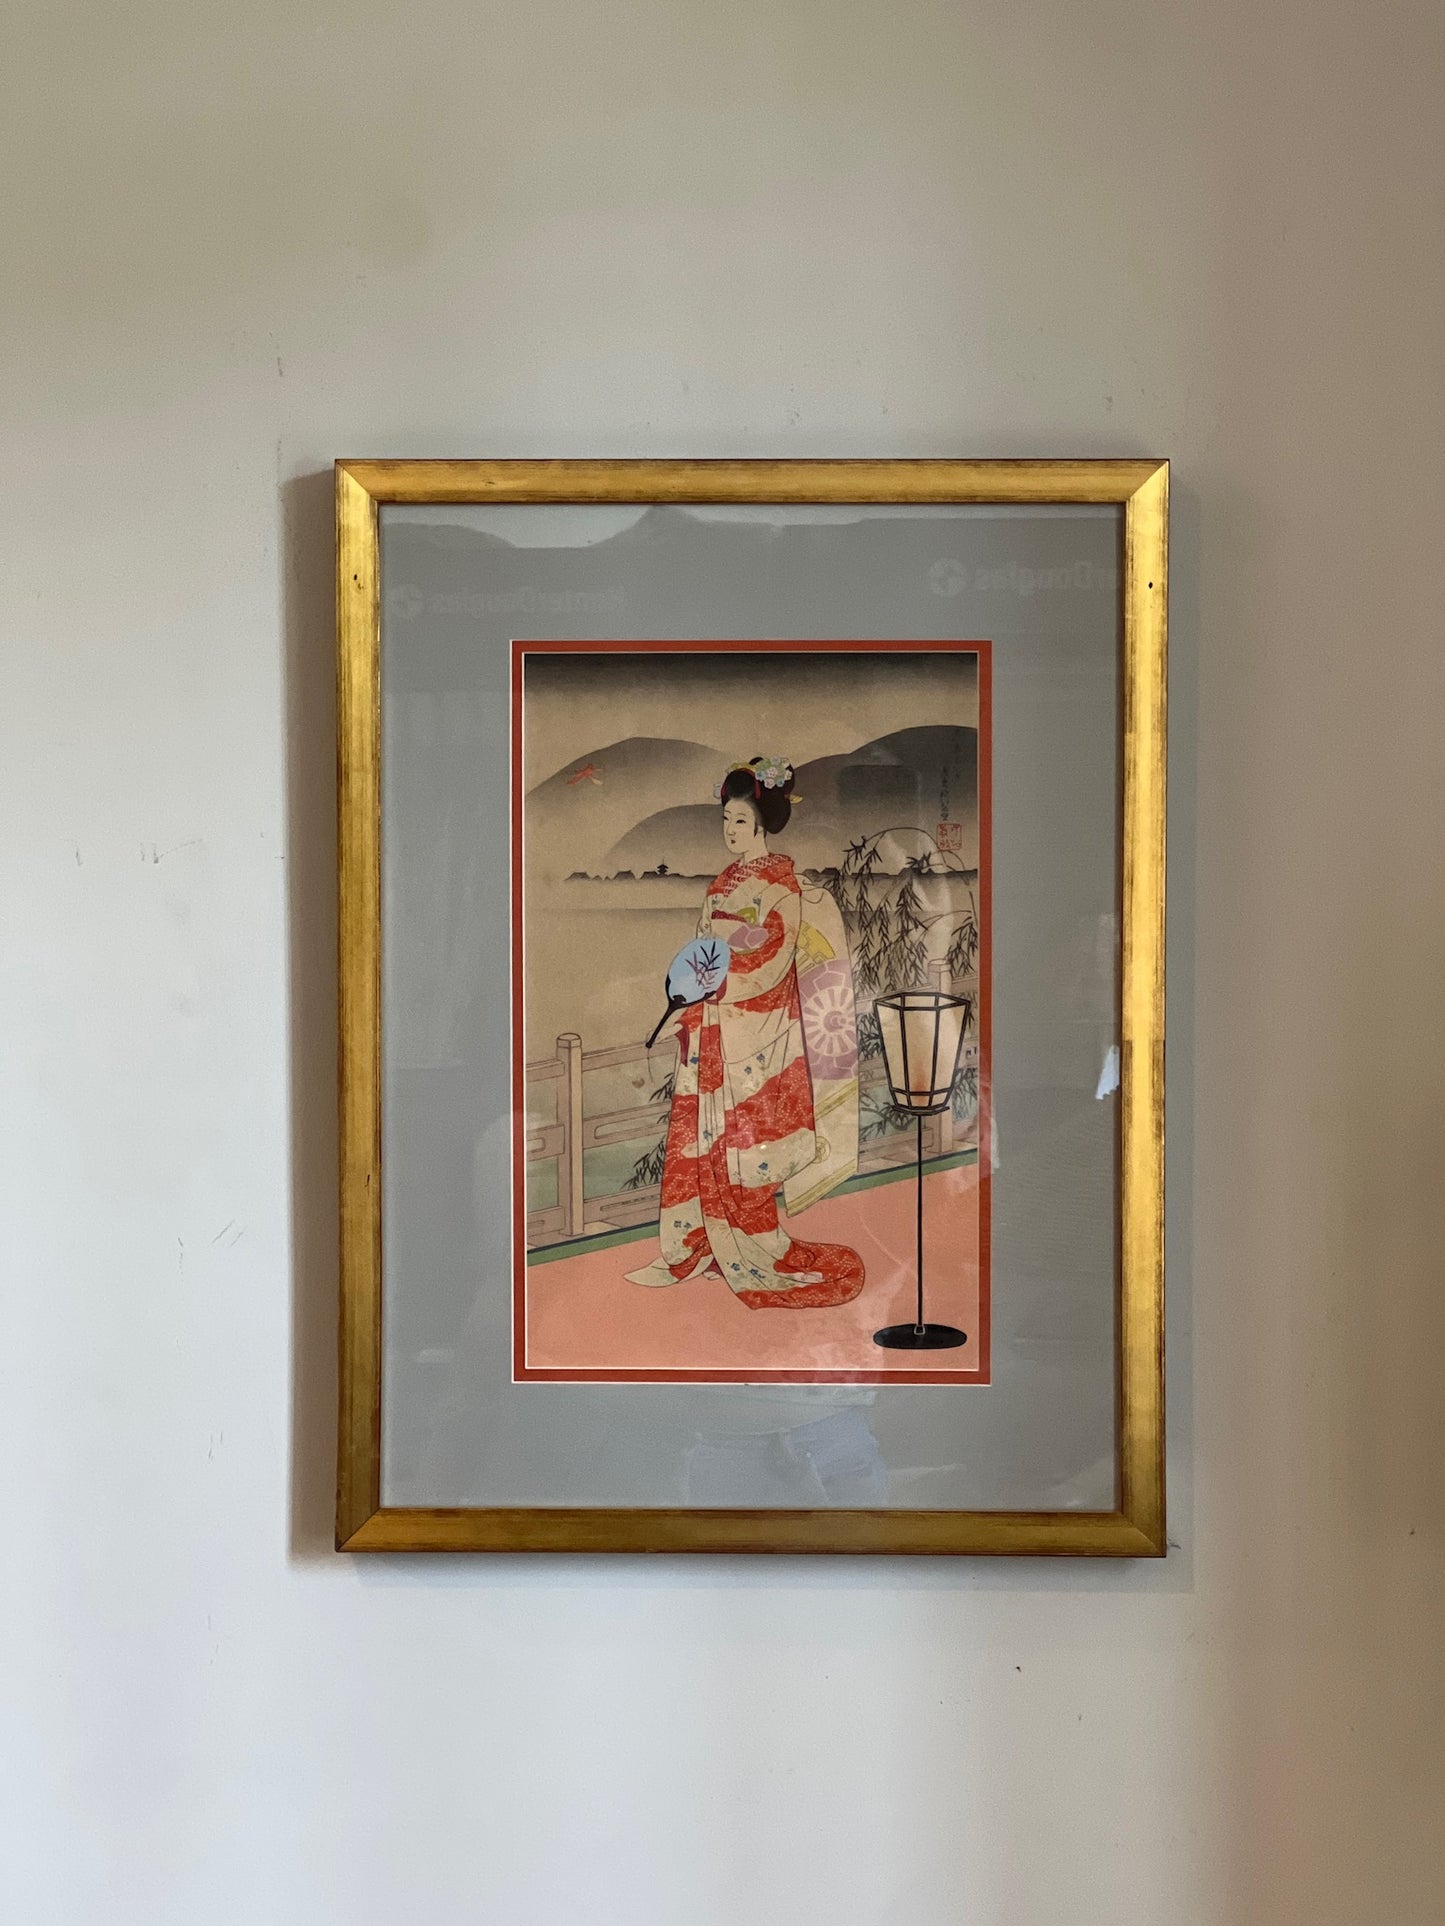 Framed East Asian Style Gouache Painting on Paper of Woman